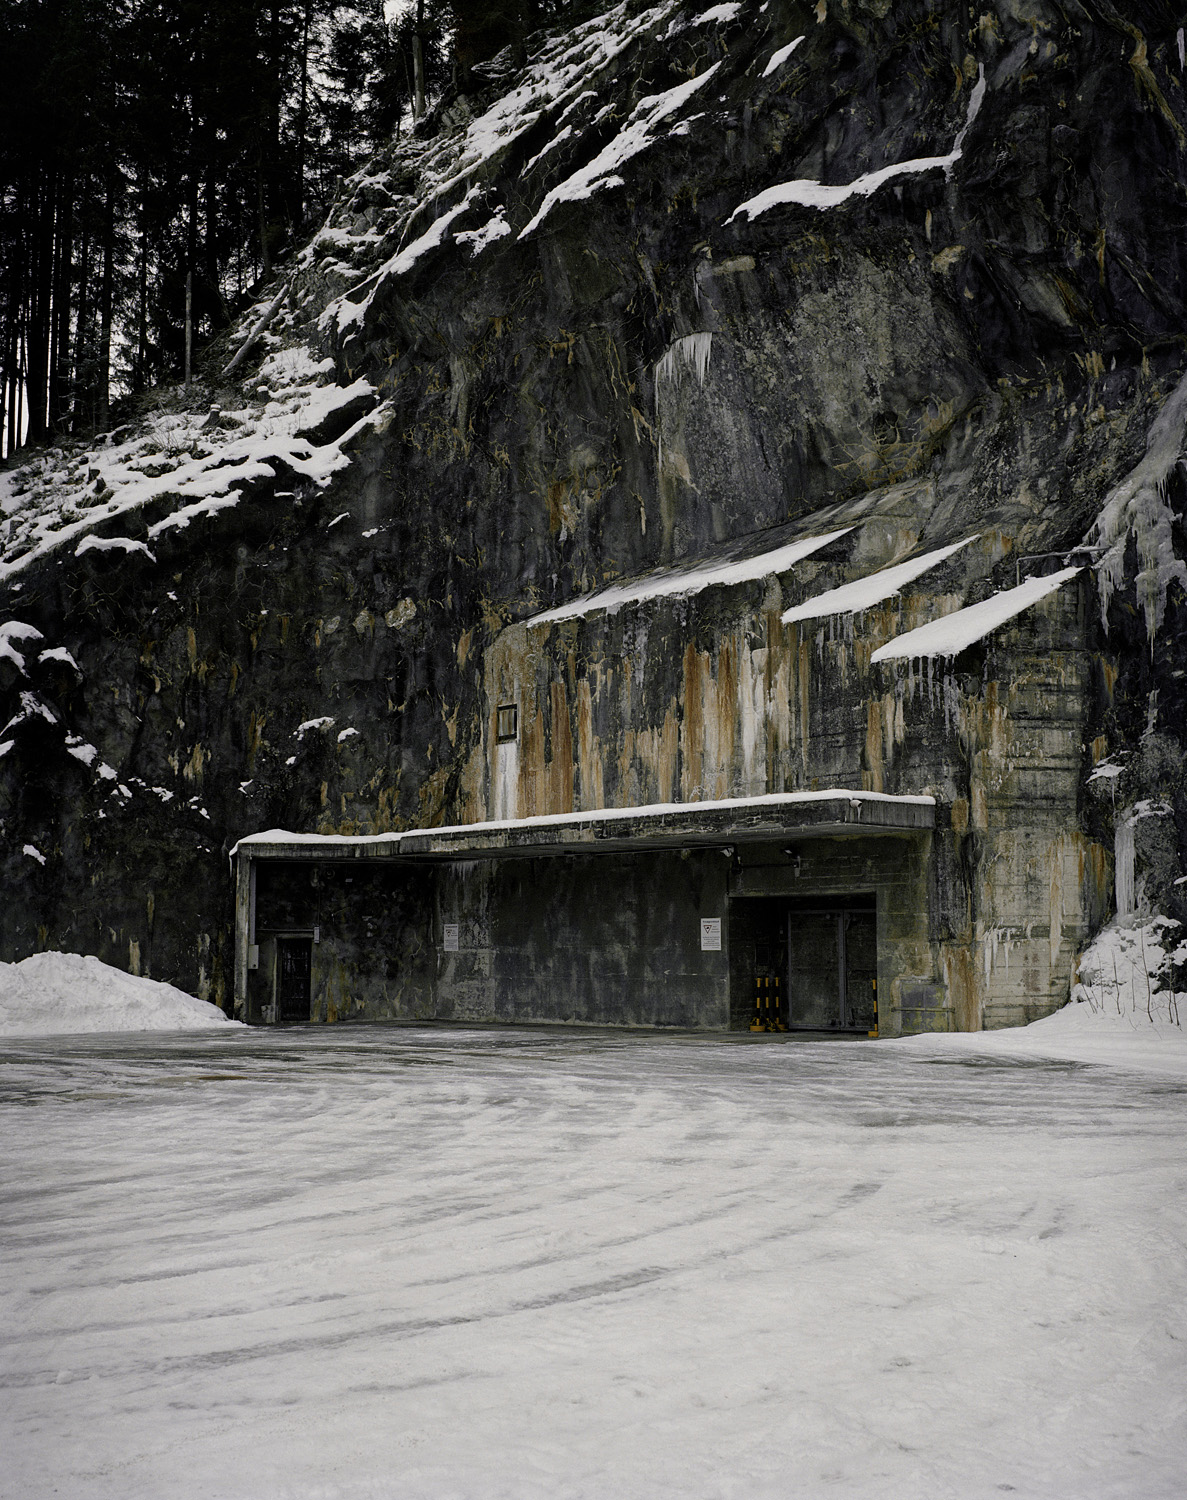 Entrance to Mount10, a the data centre known as “The Swiss Fort Knox”, Saanen-Gstaad, Switzerland, 2010.